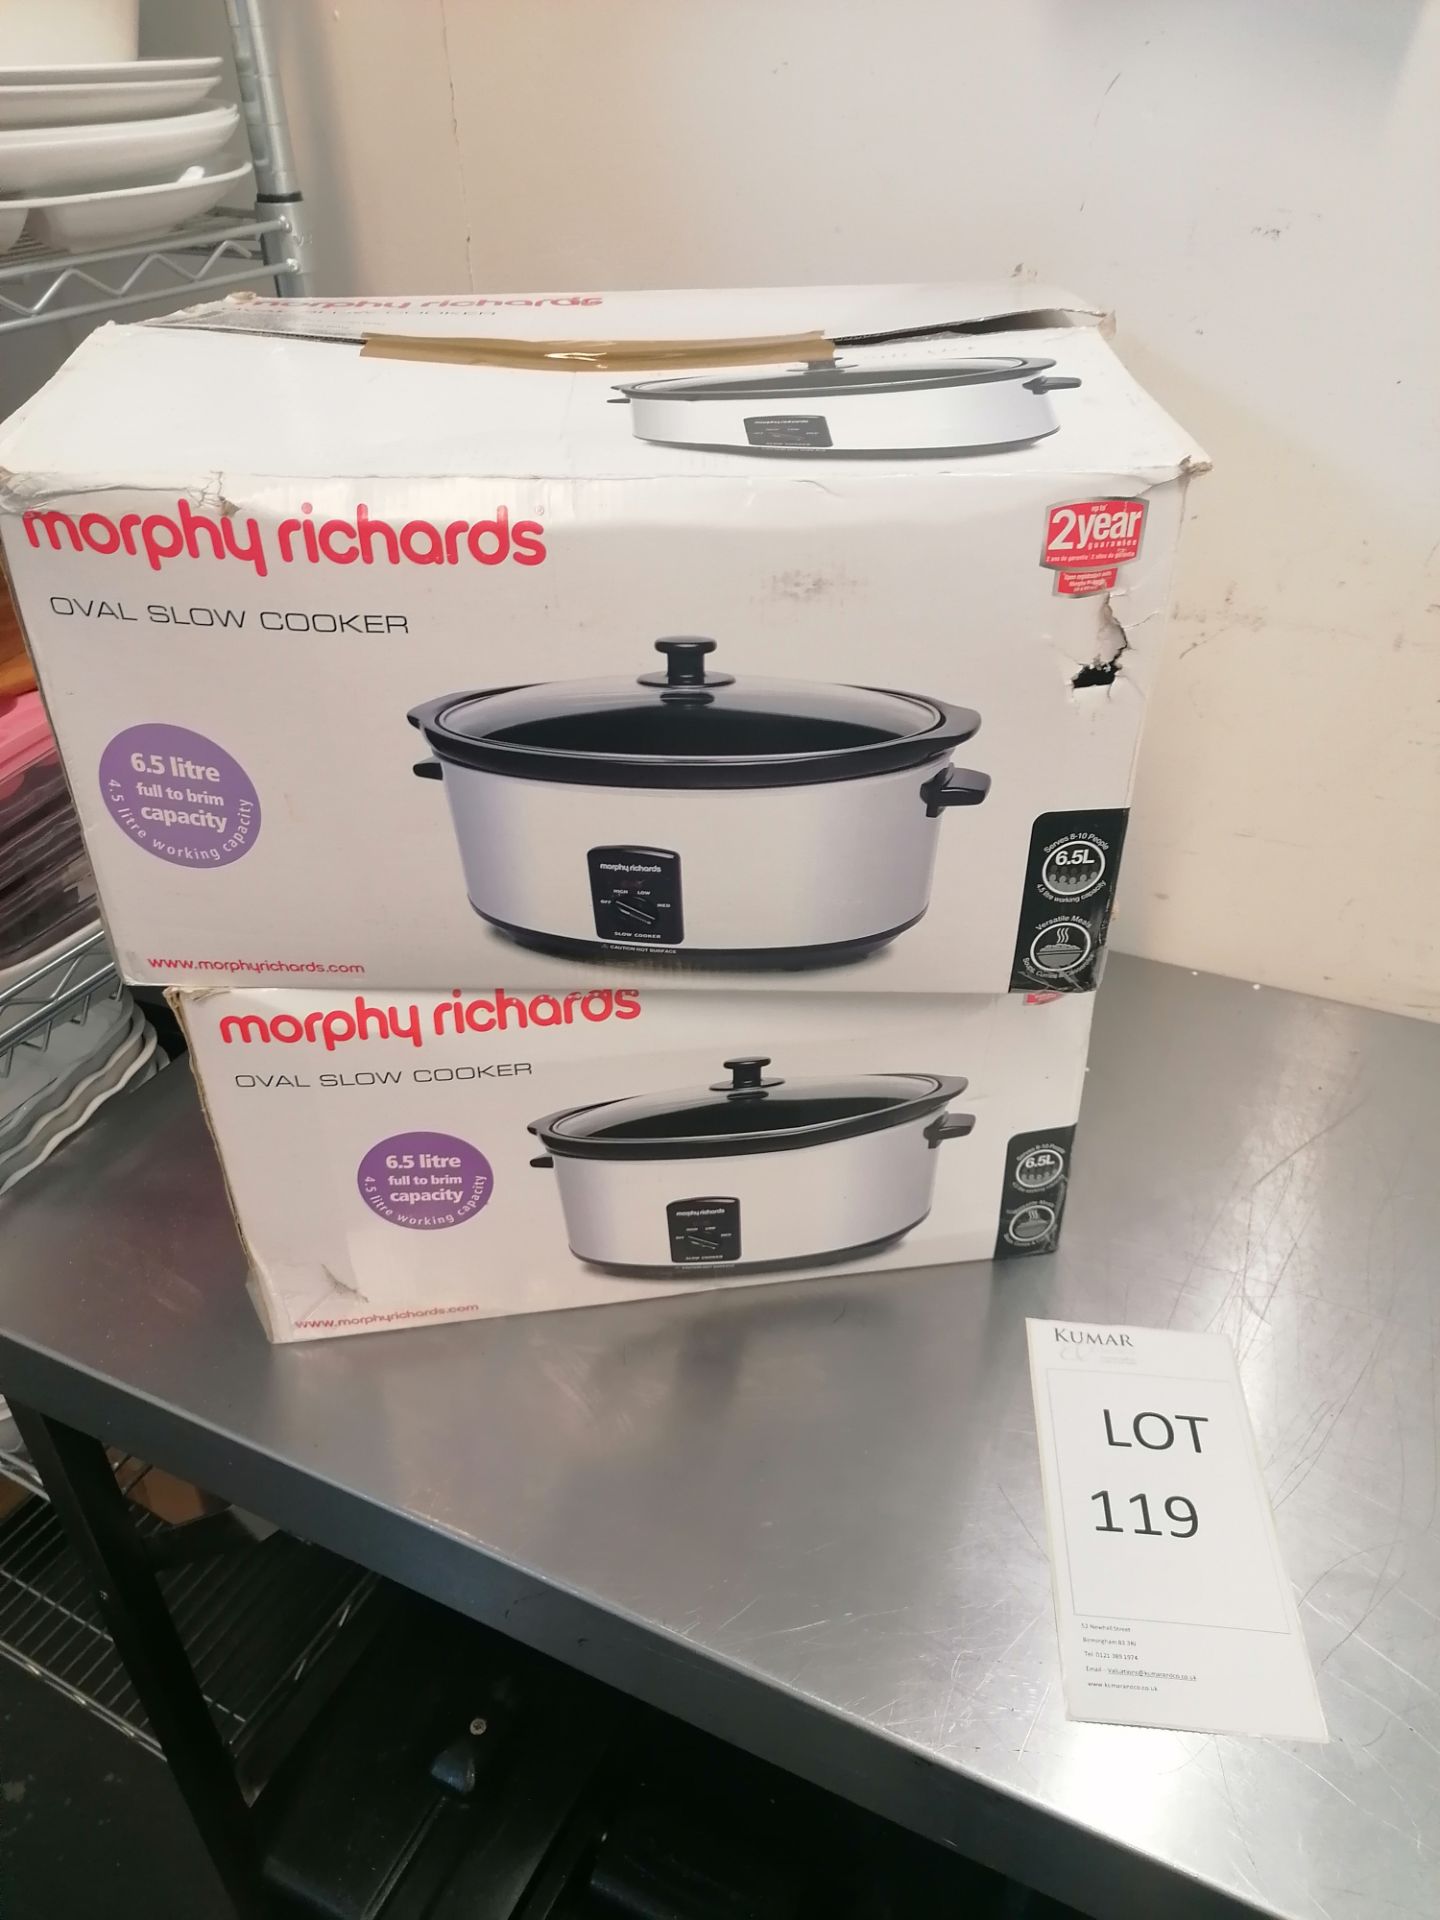 2 x Morphy richards 48705 slow cooker - Image 4 of 4